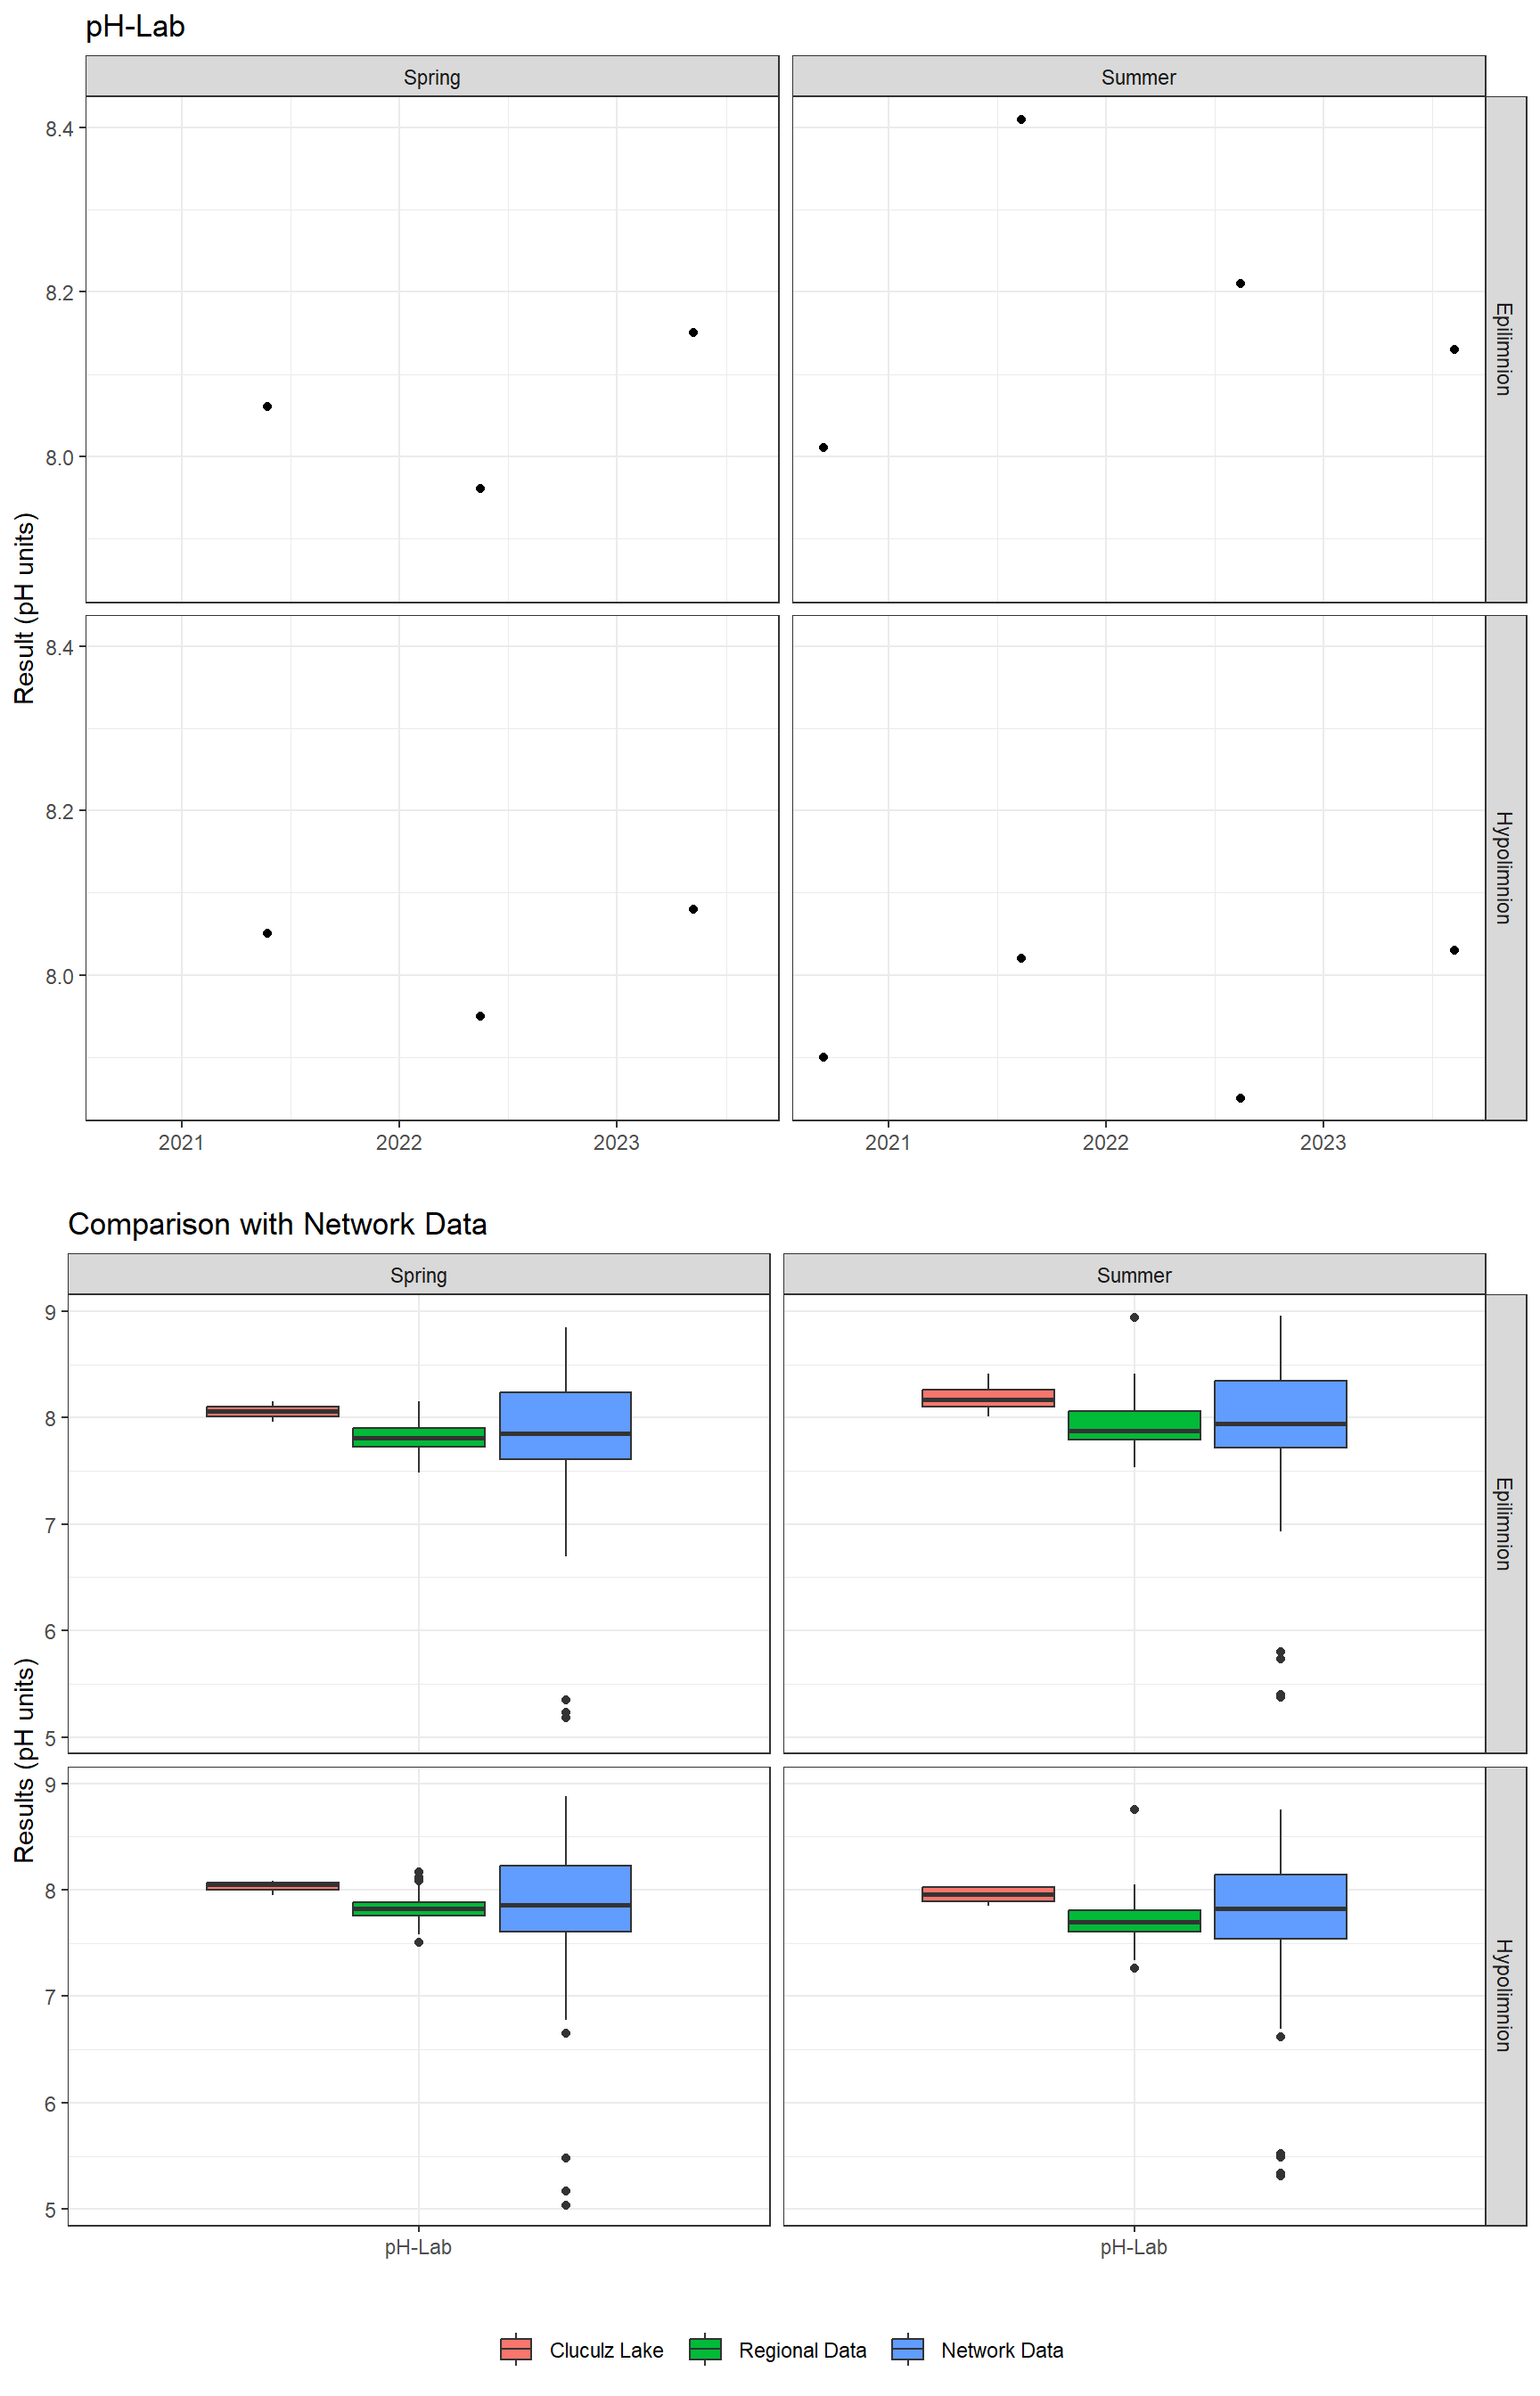 A plot showing results for pH-Lab